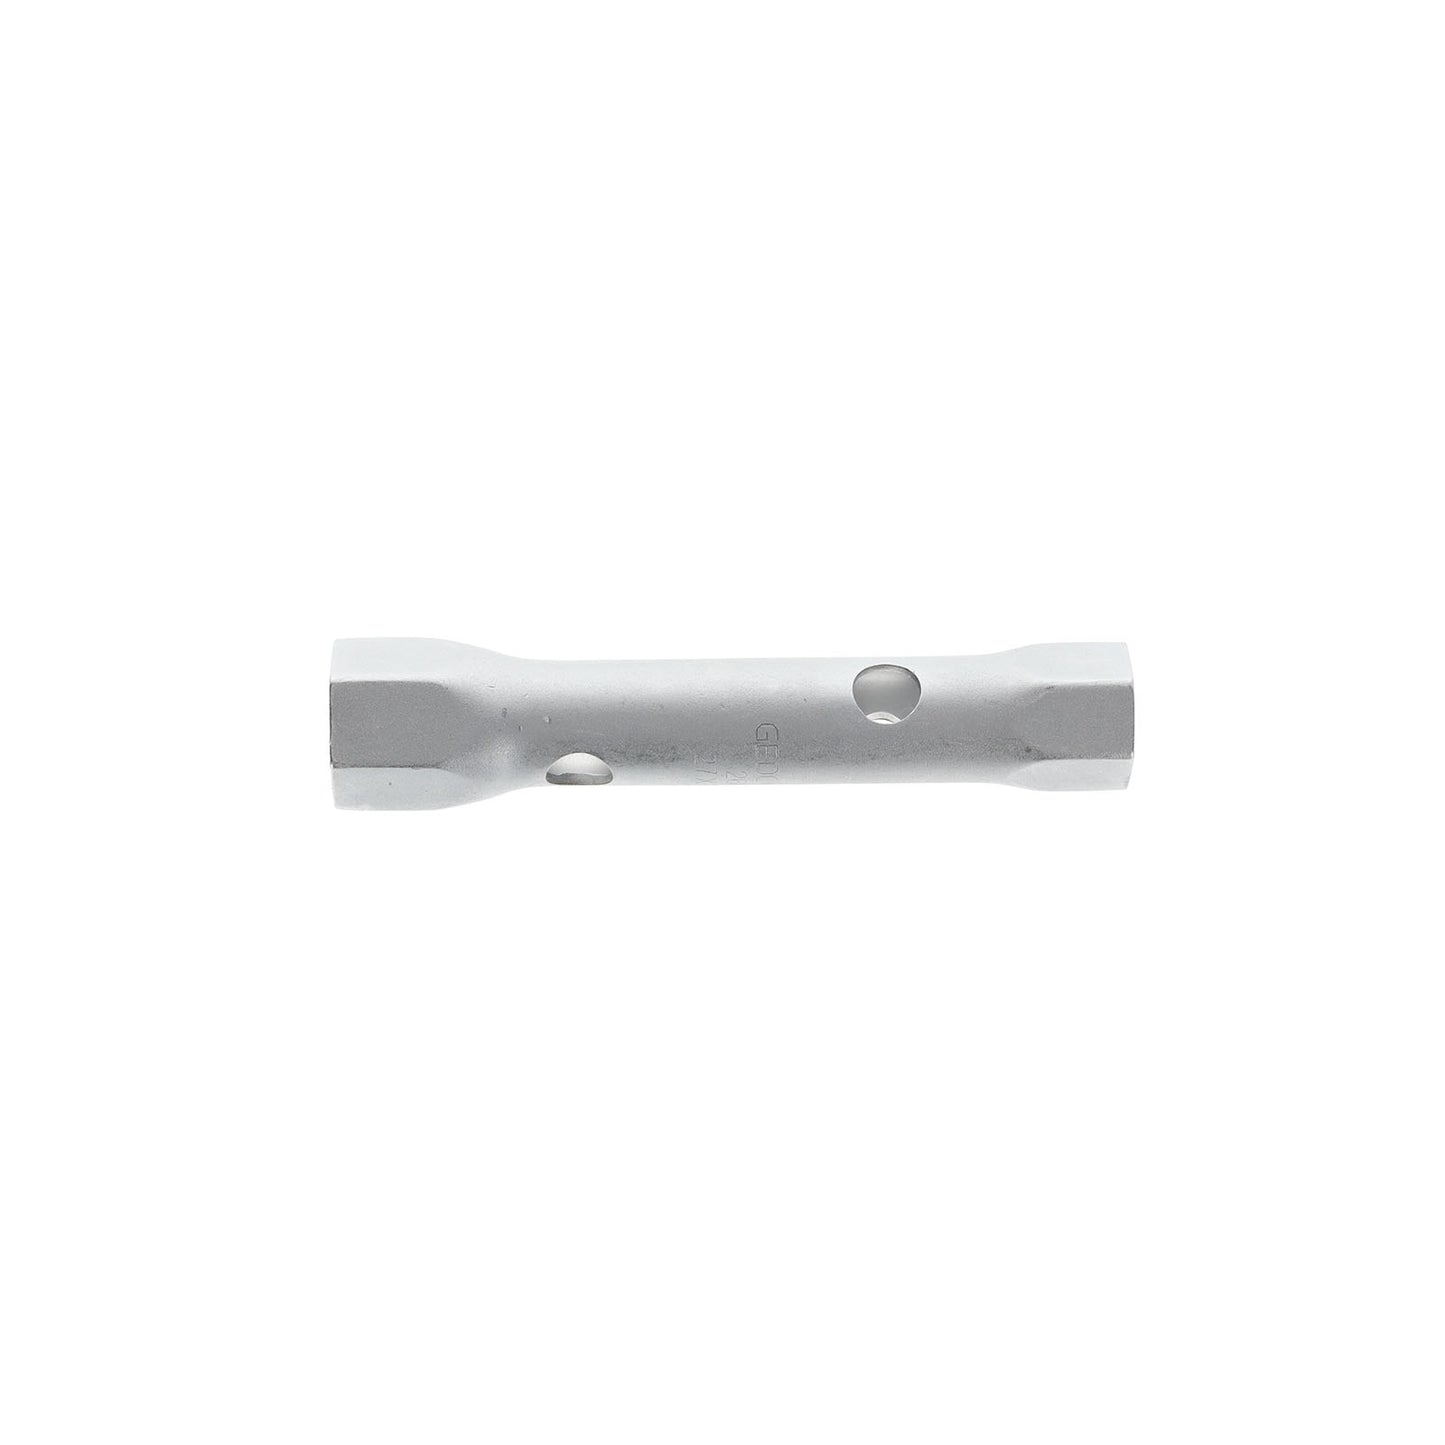 GEDORE 26 R 27X32 - Hollow Socket Wrench, 27x32 (6212930)